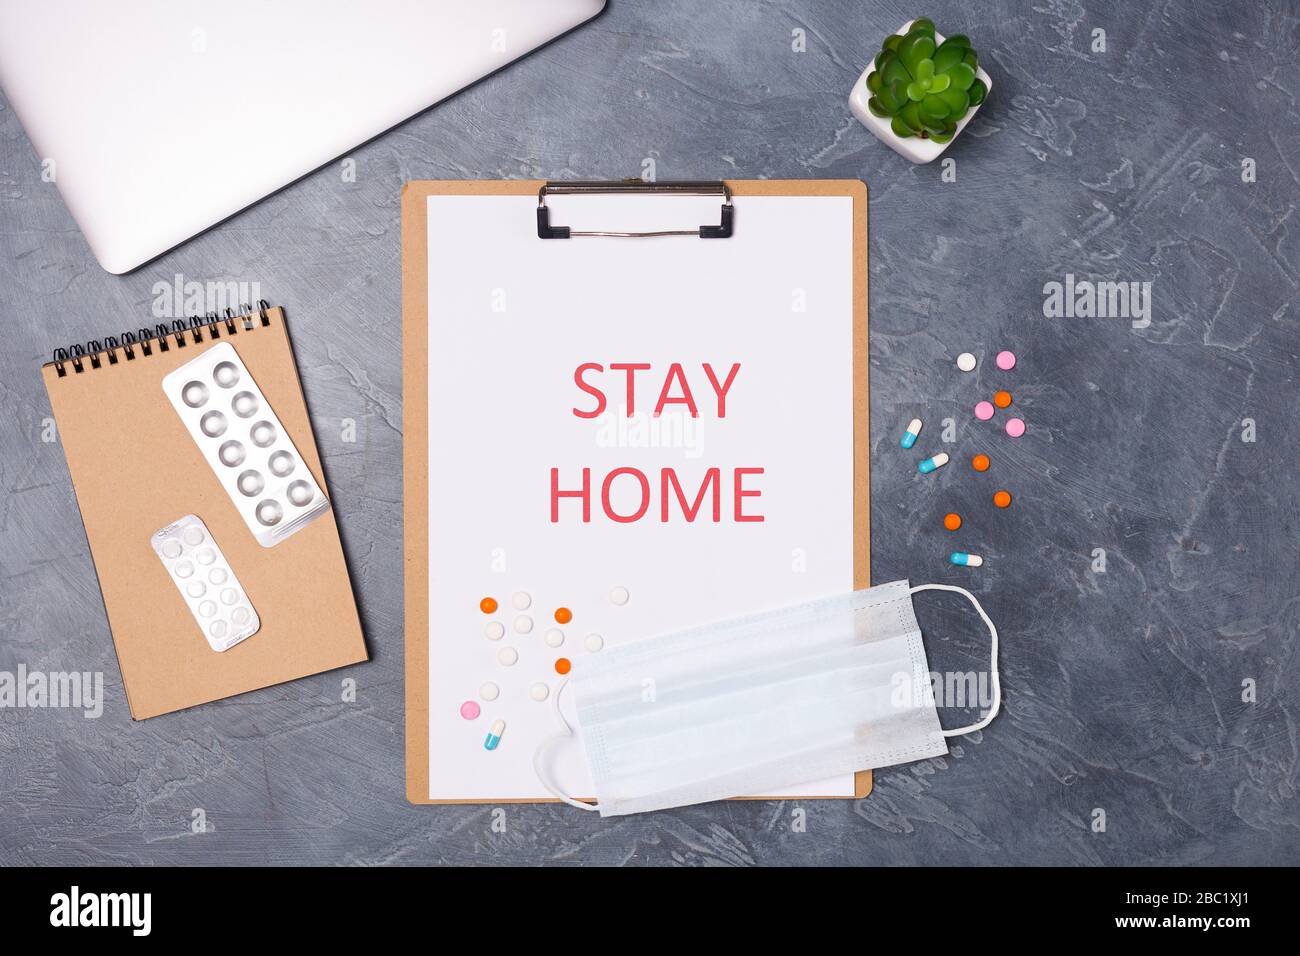 Words stay at home. Pandemic Protection Concept. Words stay at home. Minimal concept. Stay safe, concept of self quarantine as preventative measure Stock Photo